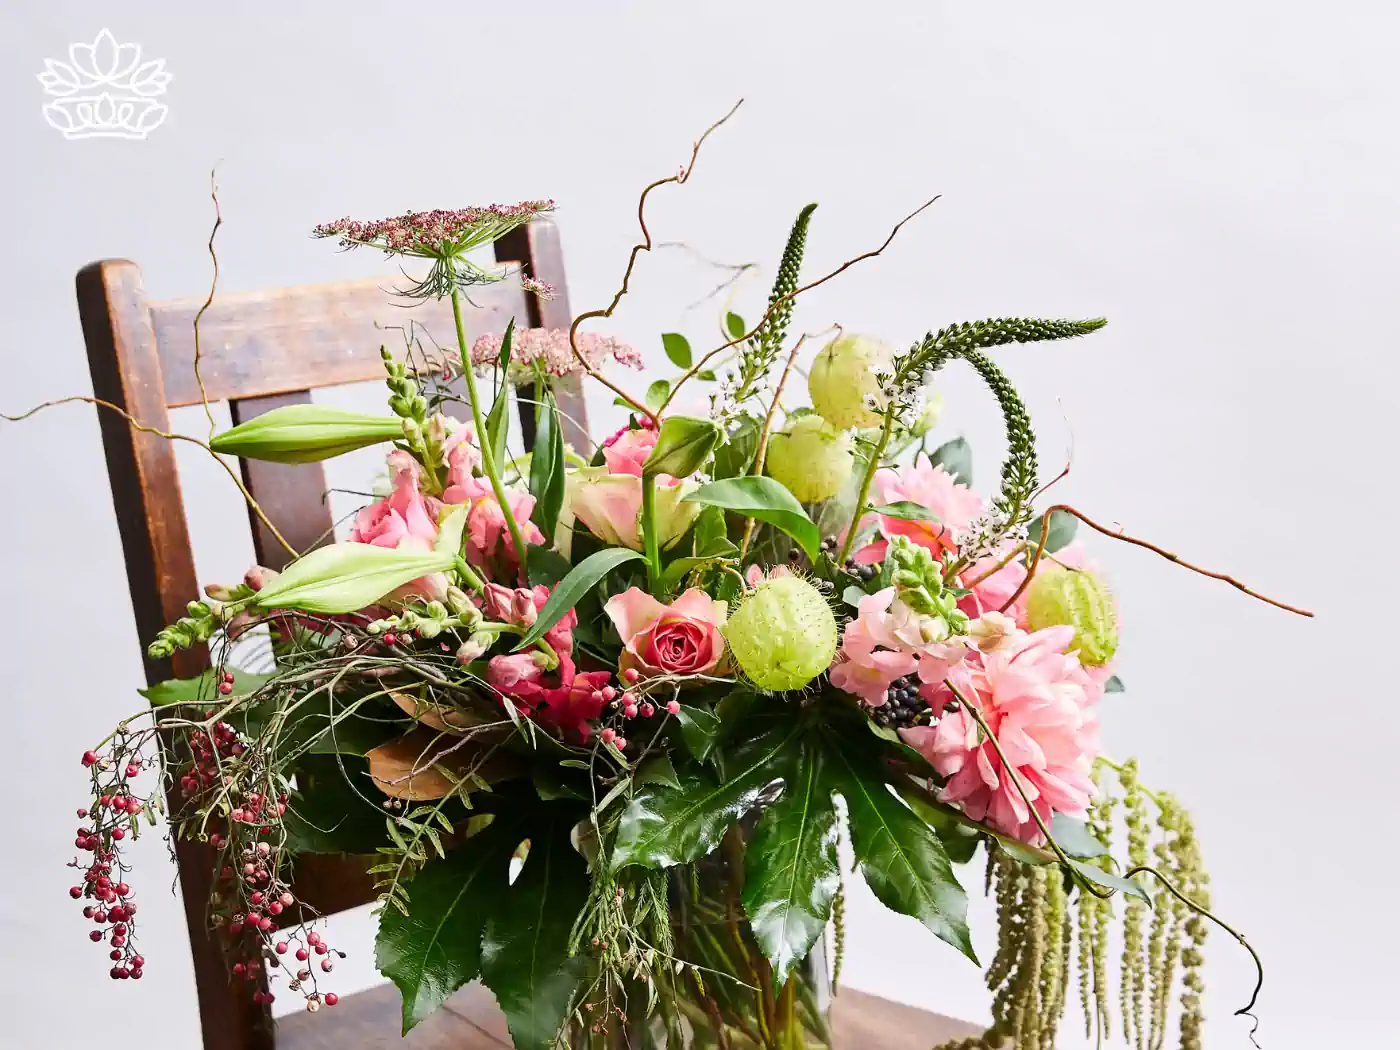 Charming arrangement of pink roses mixed with delicate blush snapdragons and greenery, gracefully presented in a clear vase on a vintage wooden chair.